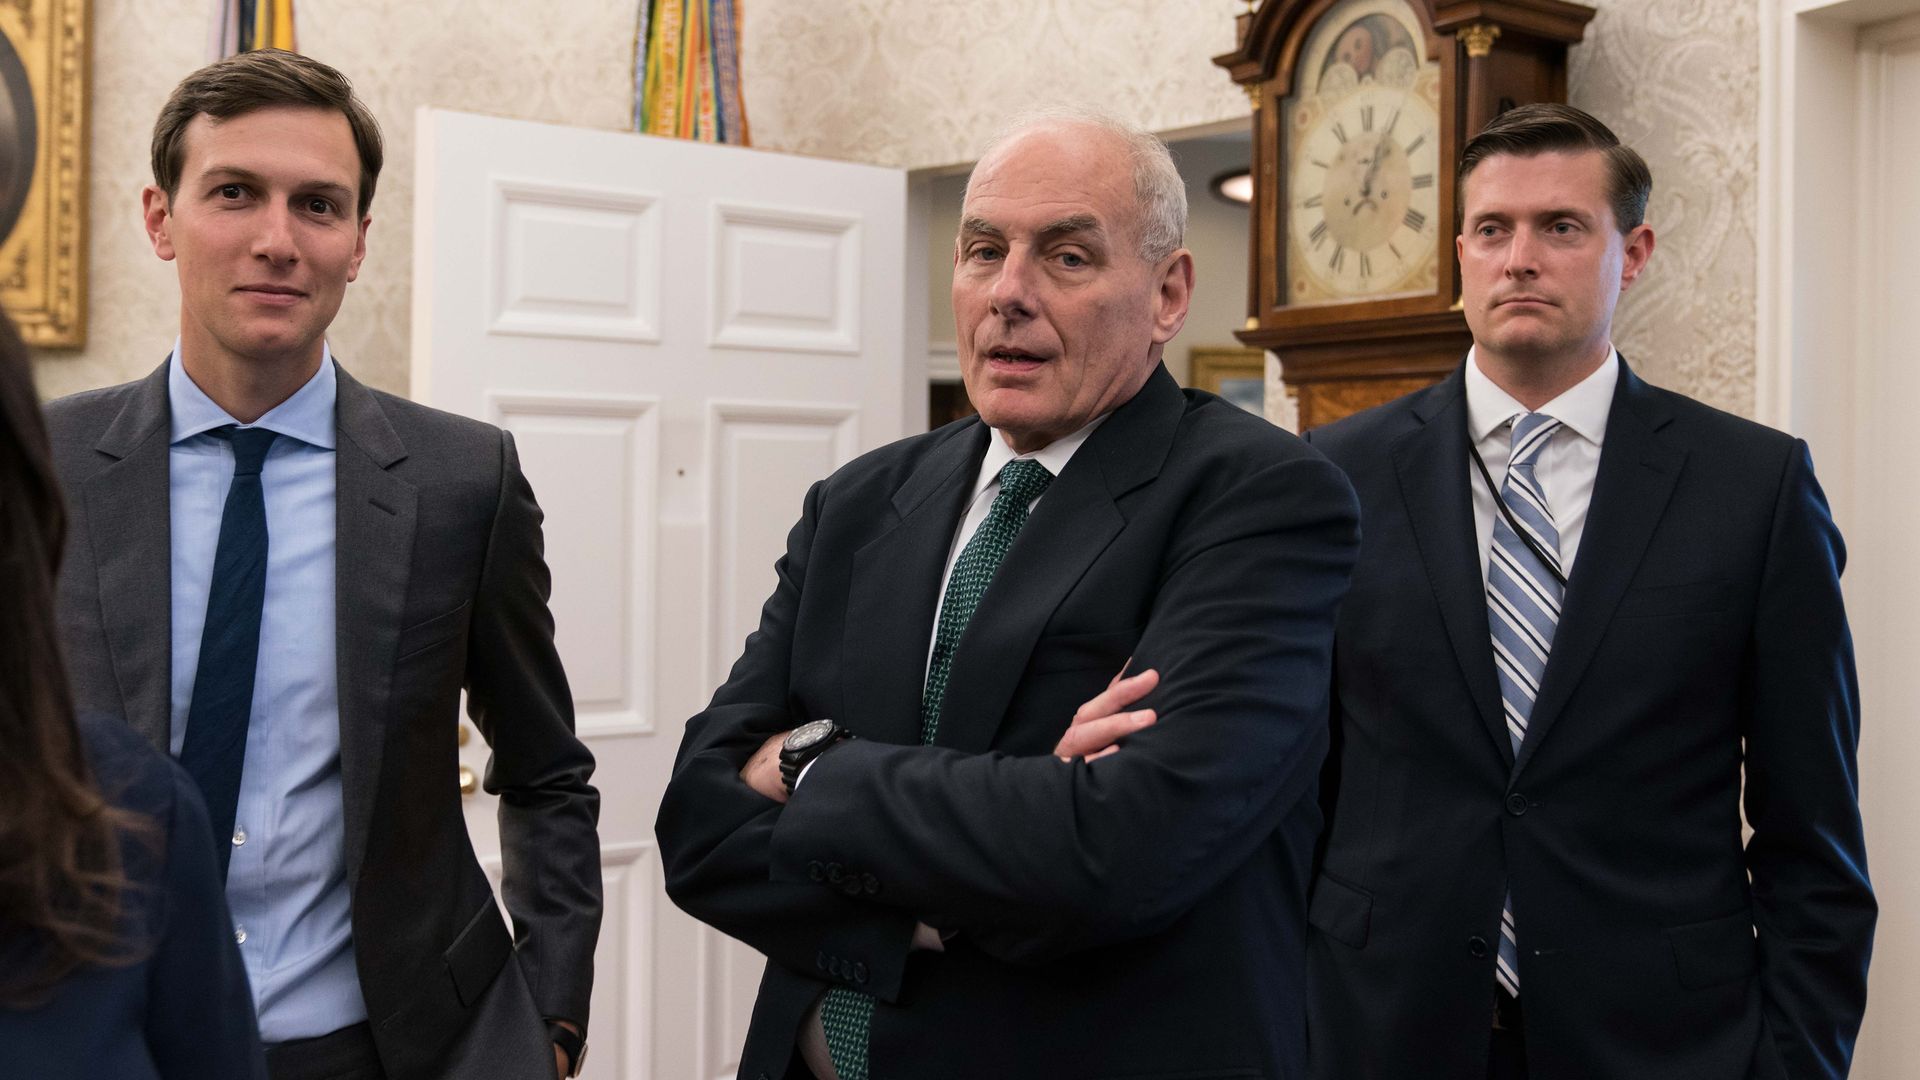 Jared Kushner, John Kelly, and Rob Porter in the Oval Office